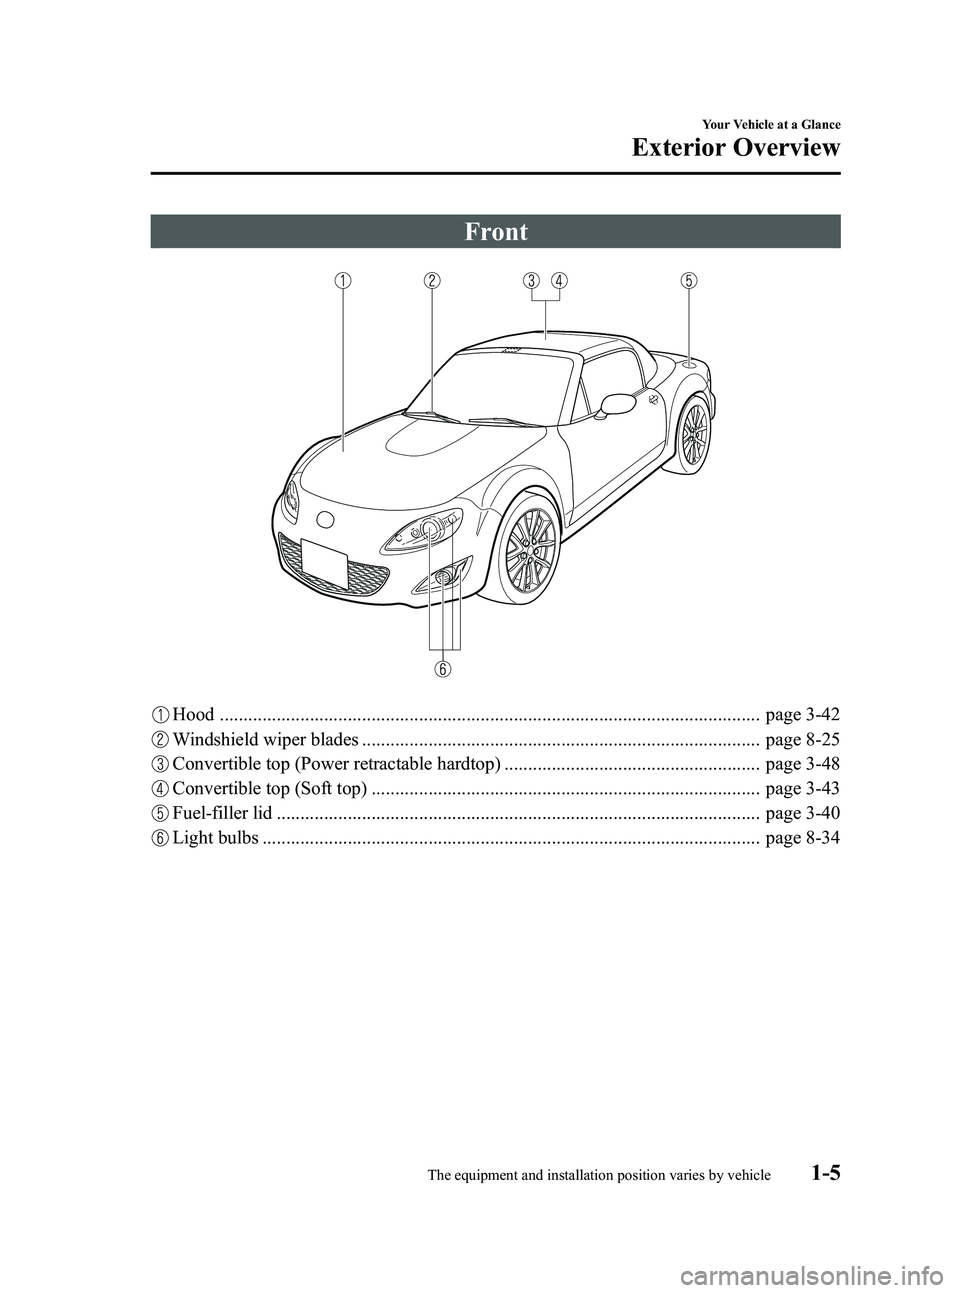 MAZDA MODEL MX-5 MIATA POWER RETRACTABLE HARDTOP 2010  Owners Manual Black plate (11,1)
Front
Hood .................................................................................................................. page 3-42
Windshield wiper blades .....................